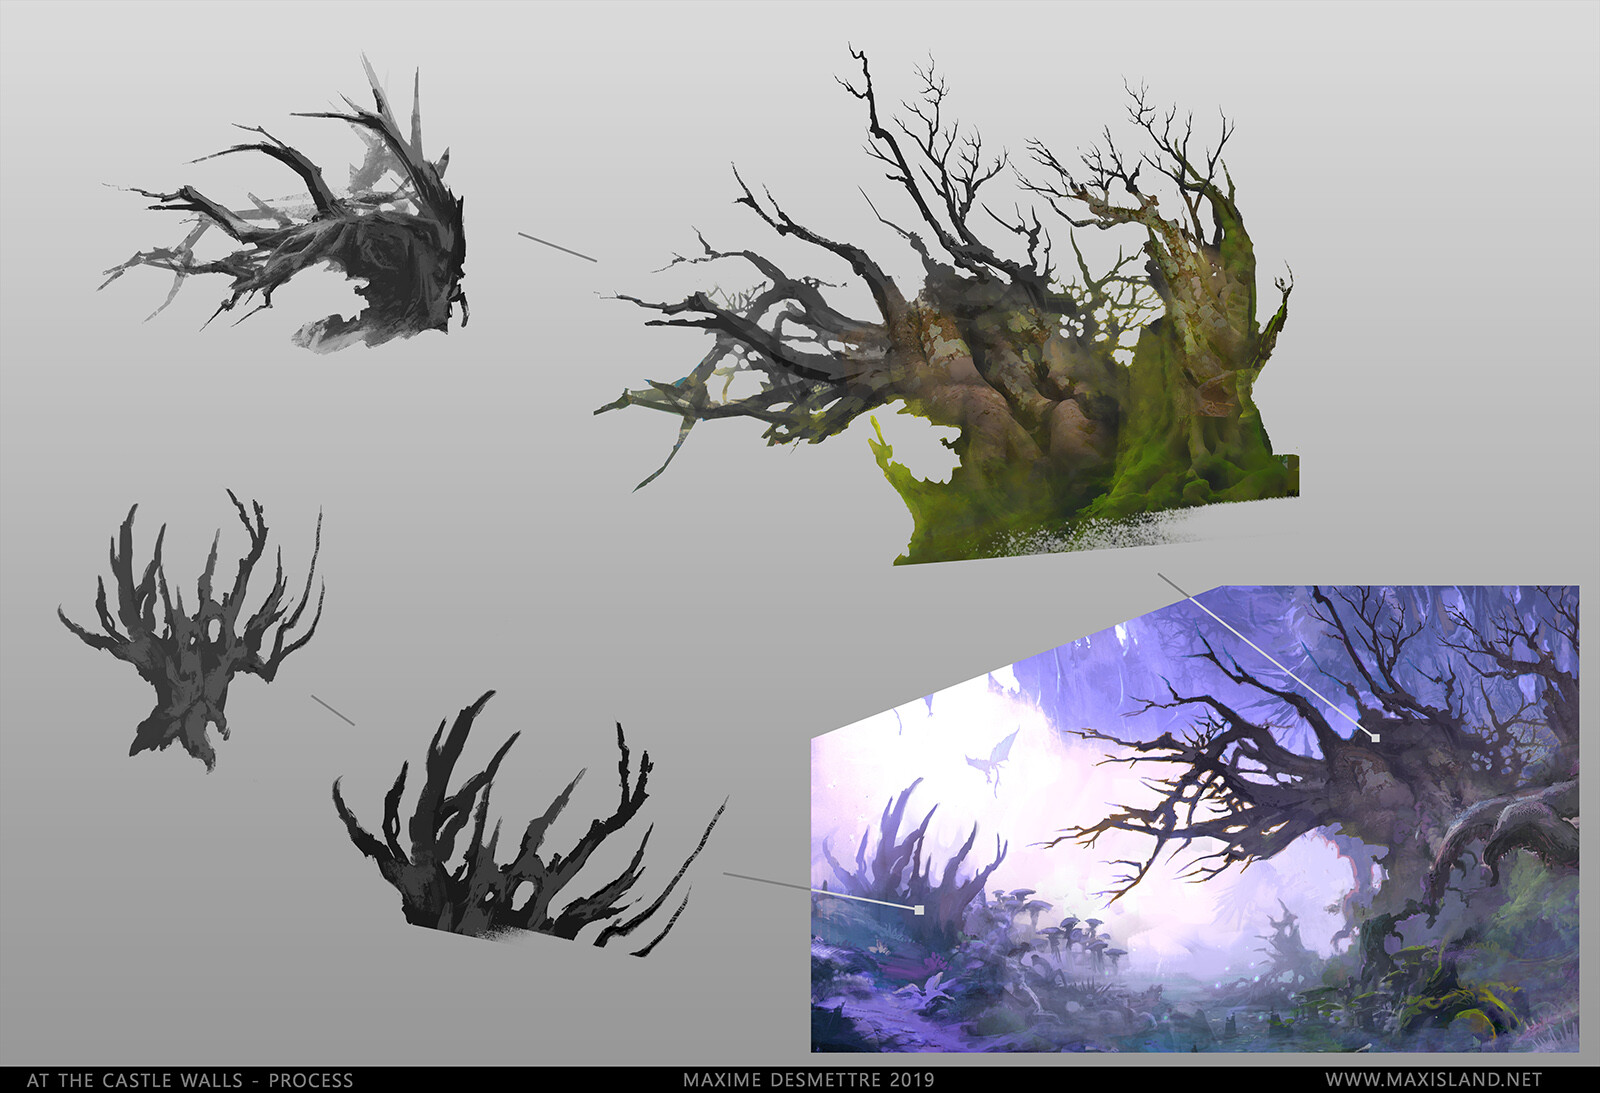 In this example : I'm showing the initial tree shapes that led to the final result.
If you're looking for similar shapes to use in your work, have a look at my store : 
https://www.artstation.com/maxisland/store